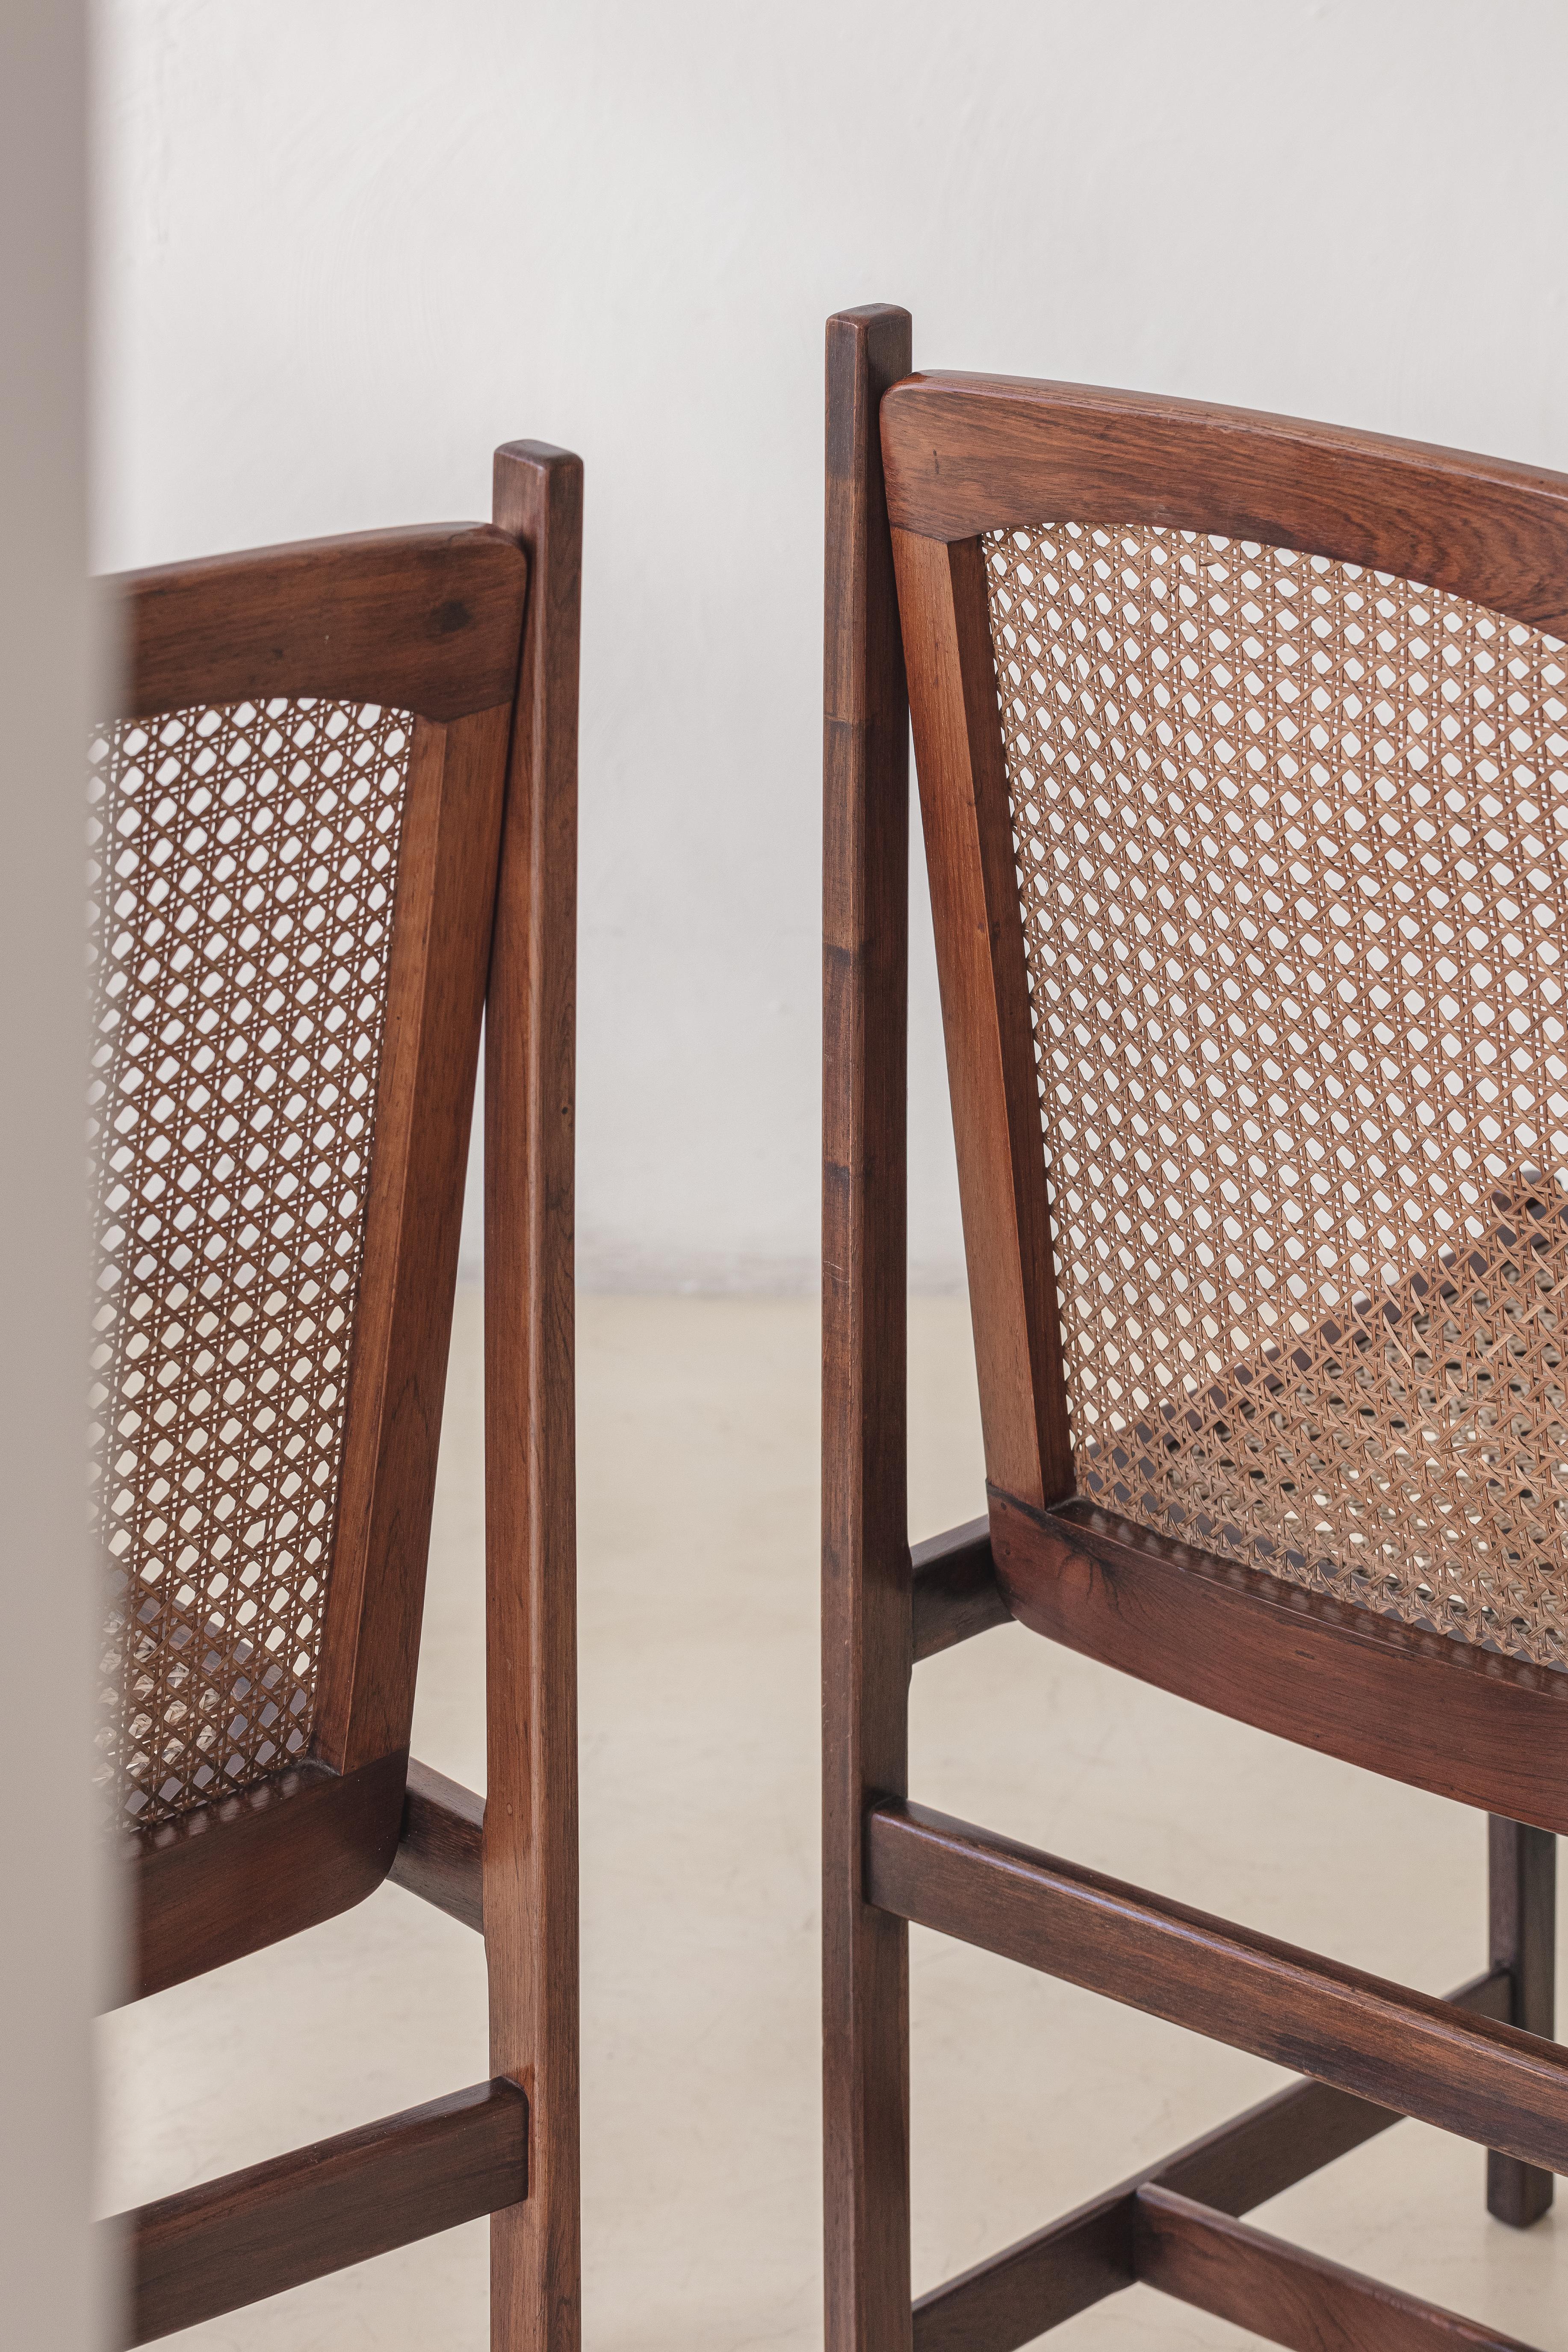 Celina Decorações set of six Dining Chairs, Rosewood and Cane, Mid-Century 1960s en vente 5